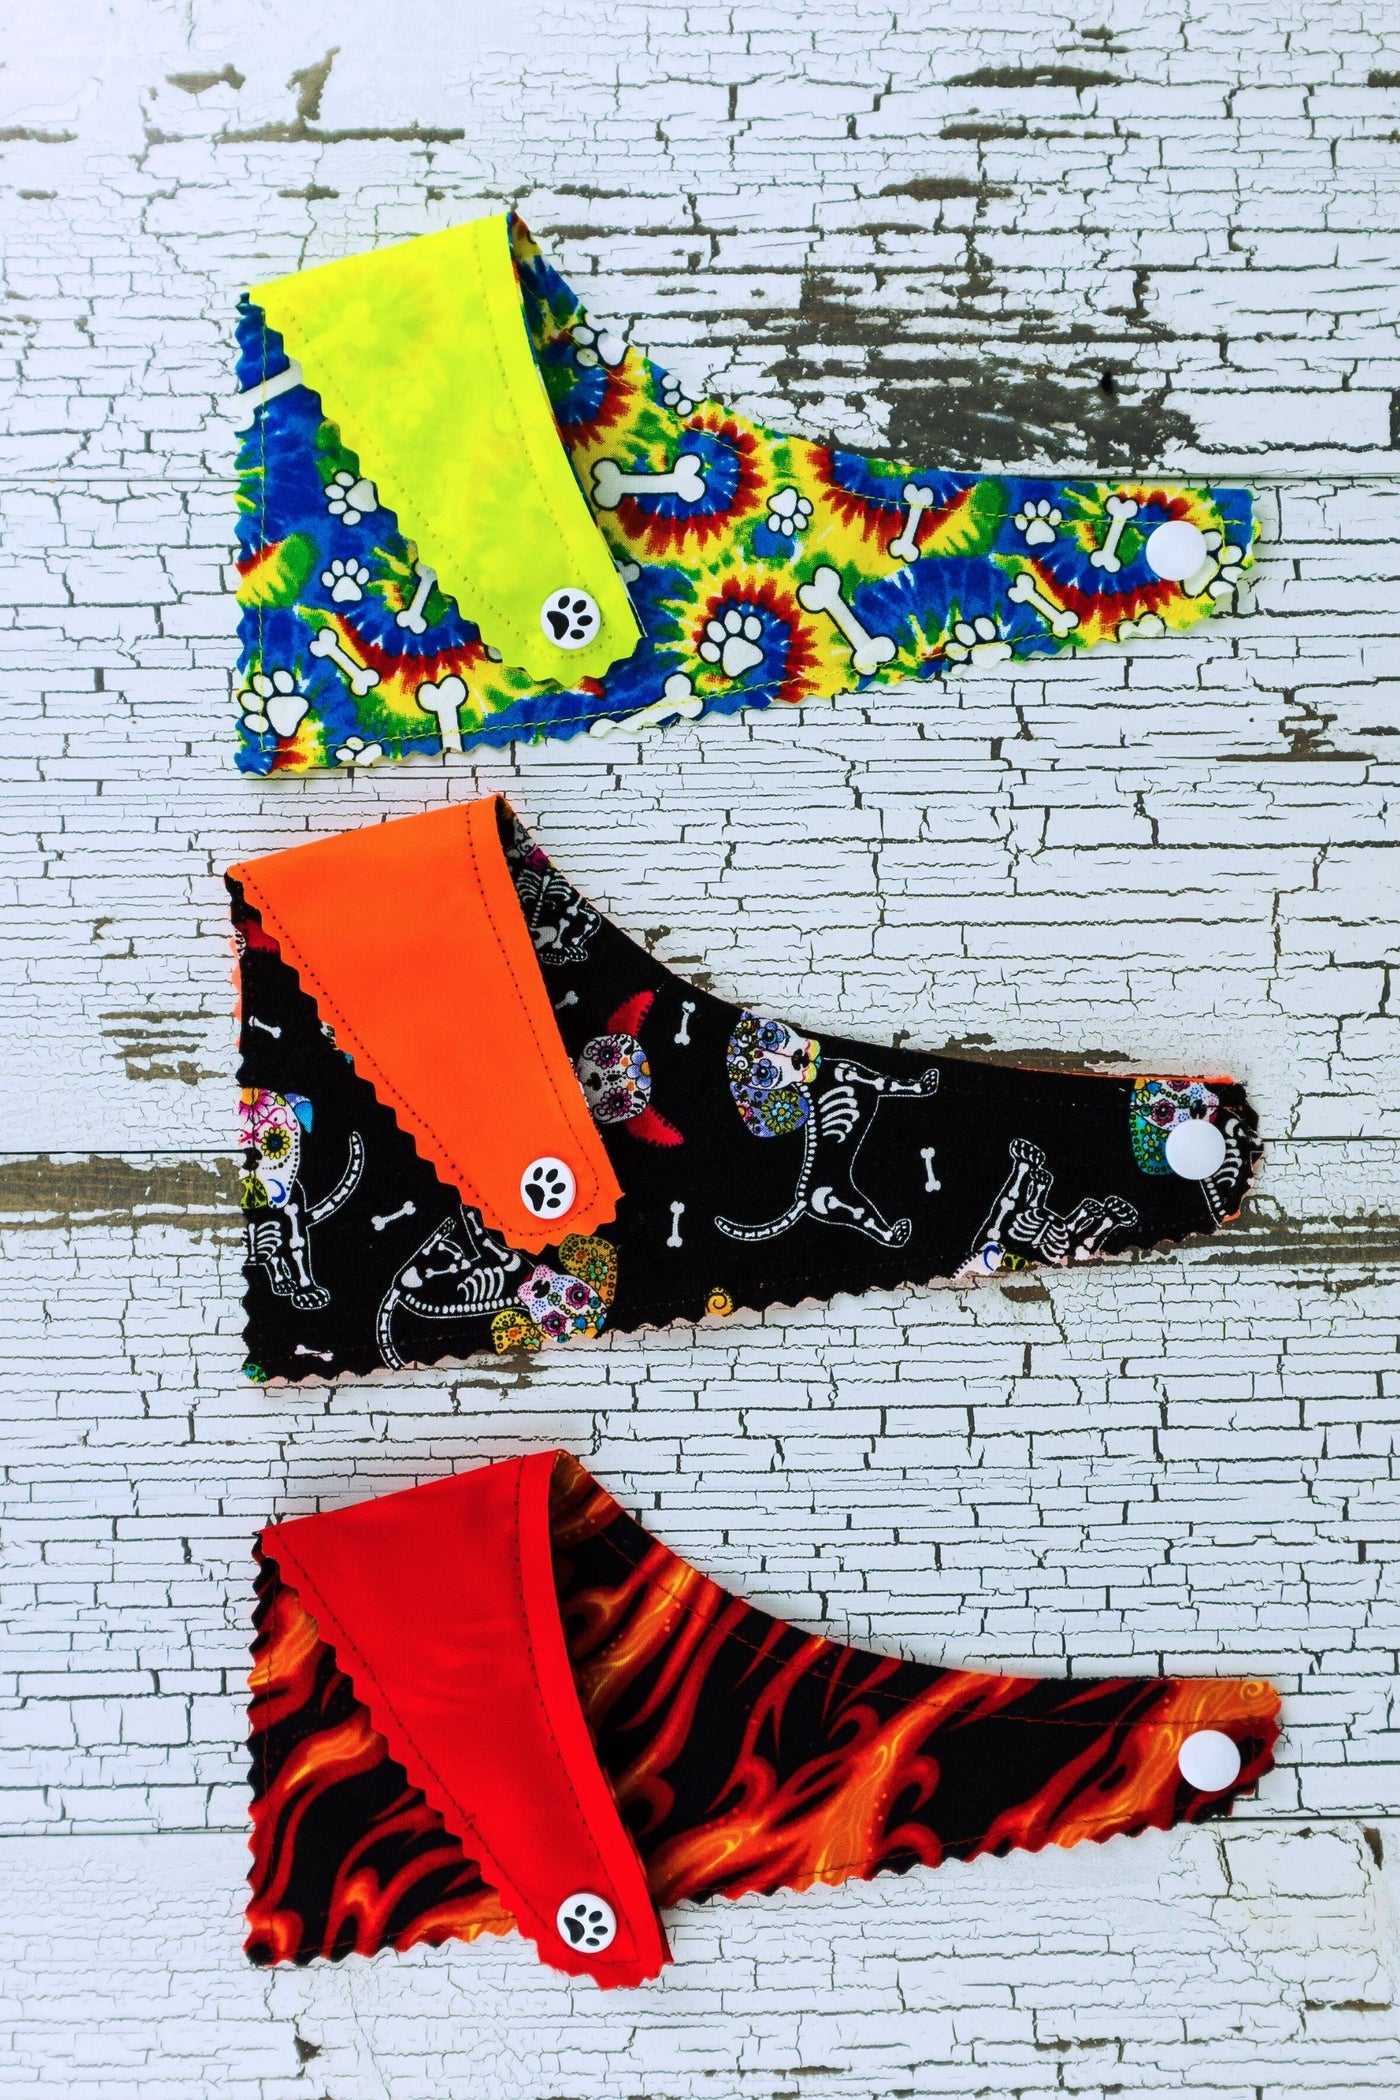 Image shows the reverse side of the reflective bandanas. The neon yellow bandana has a tie dye fabric pattern, the neon orange bandana has a black and white sugar skull dog pattern, and the red bandana has a red and orange flames pattern.